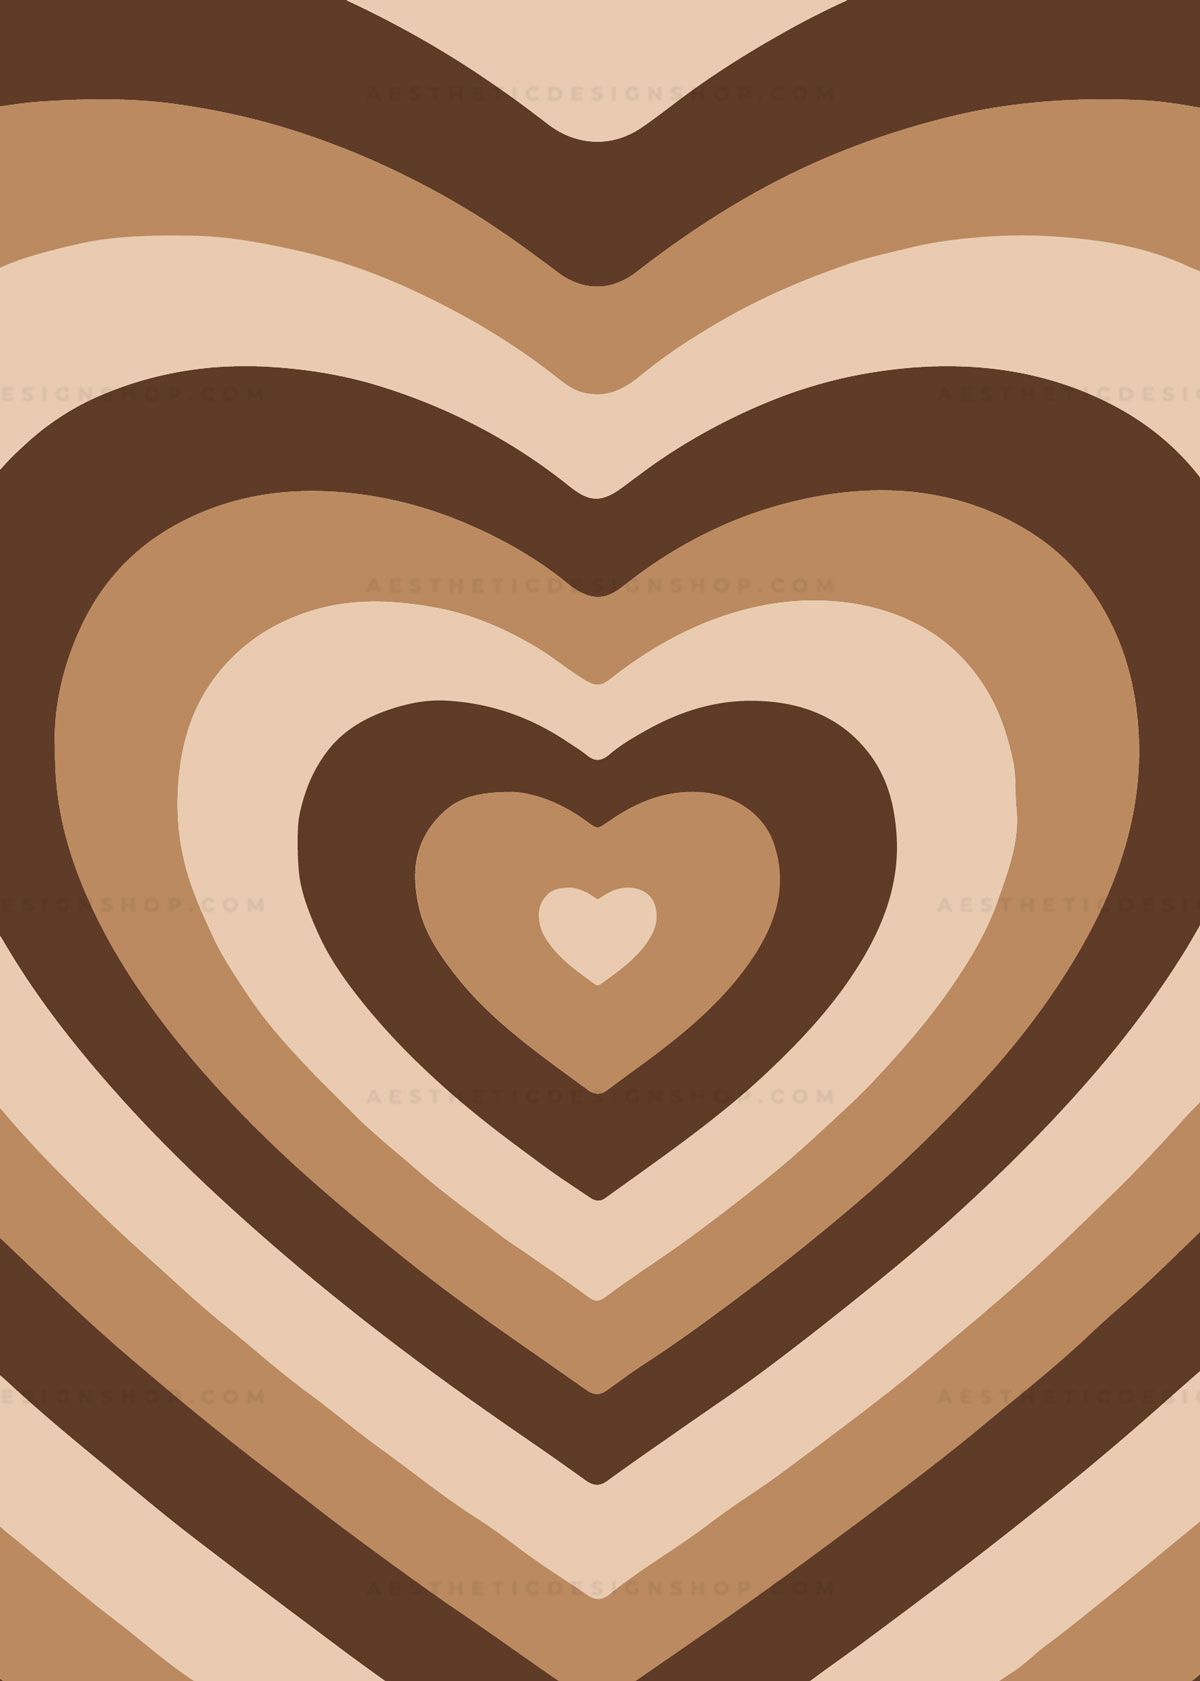 Brown aesthetic heart background image